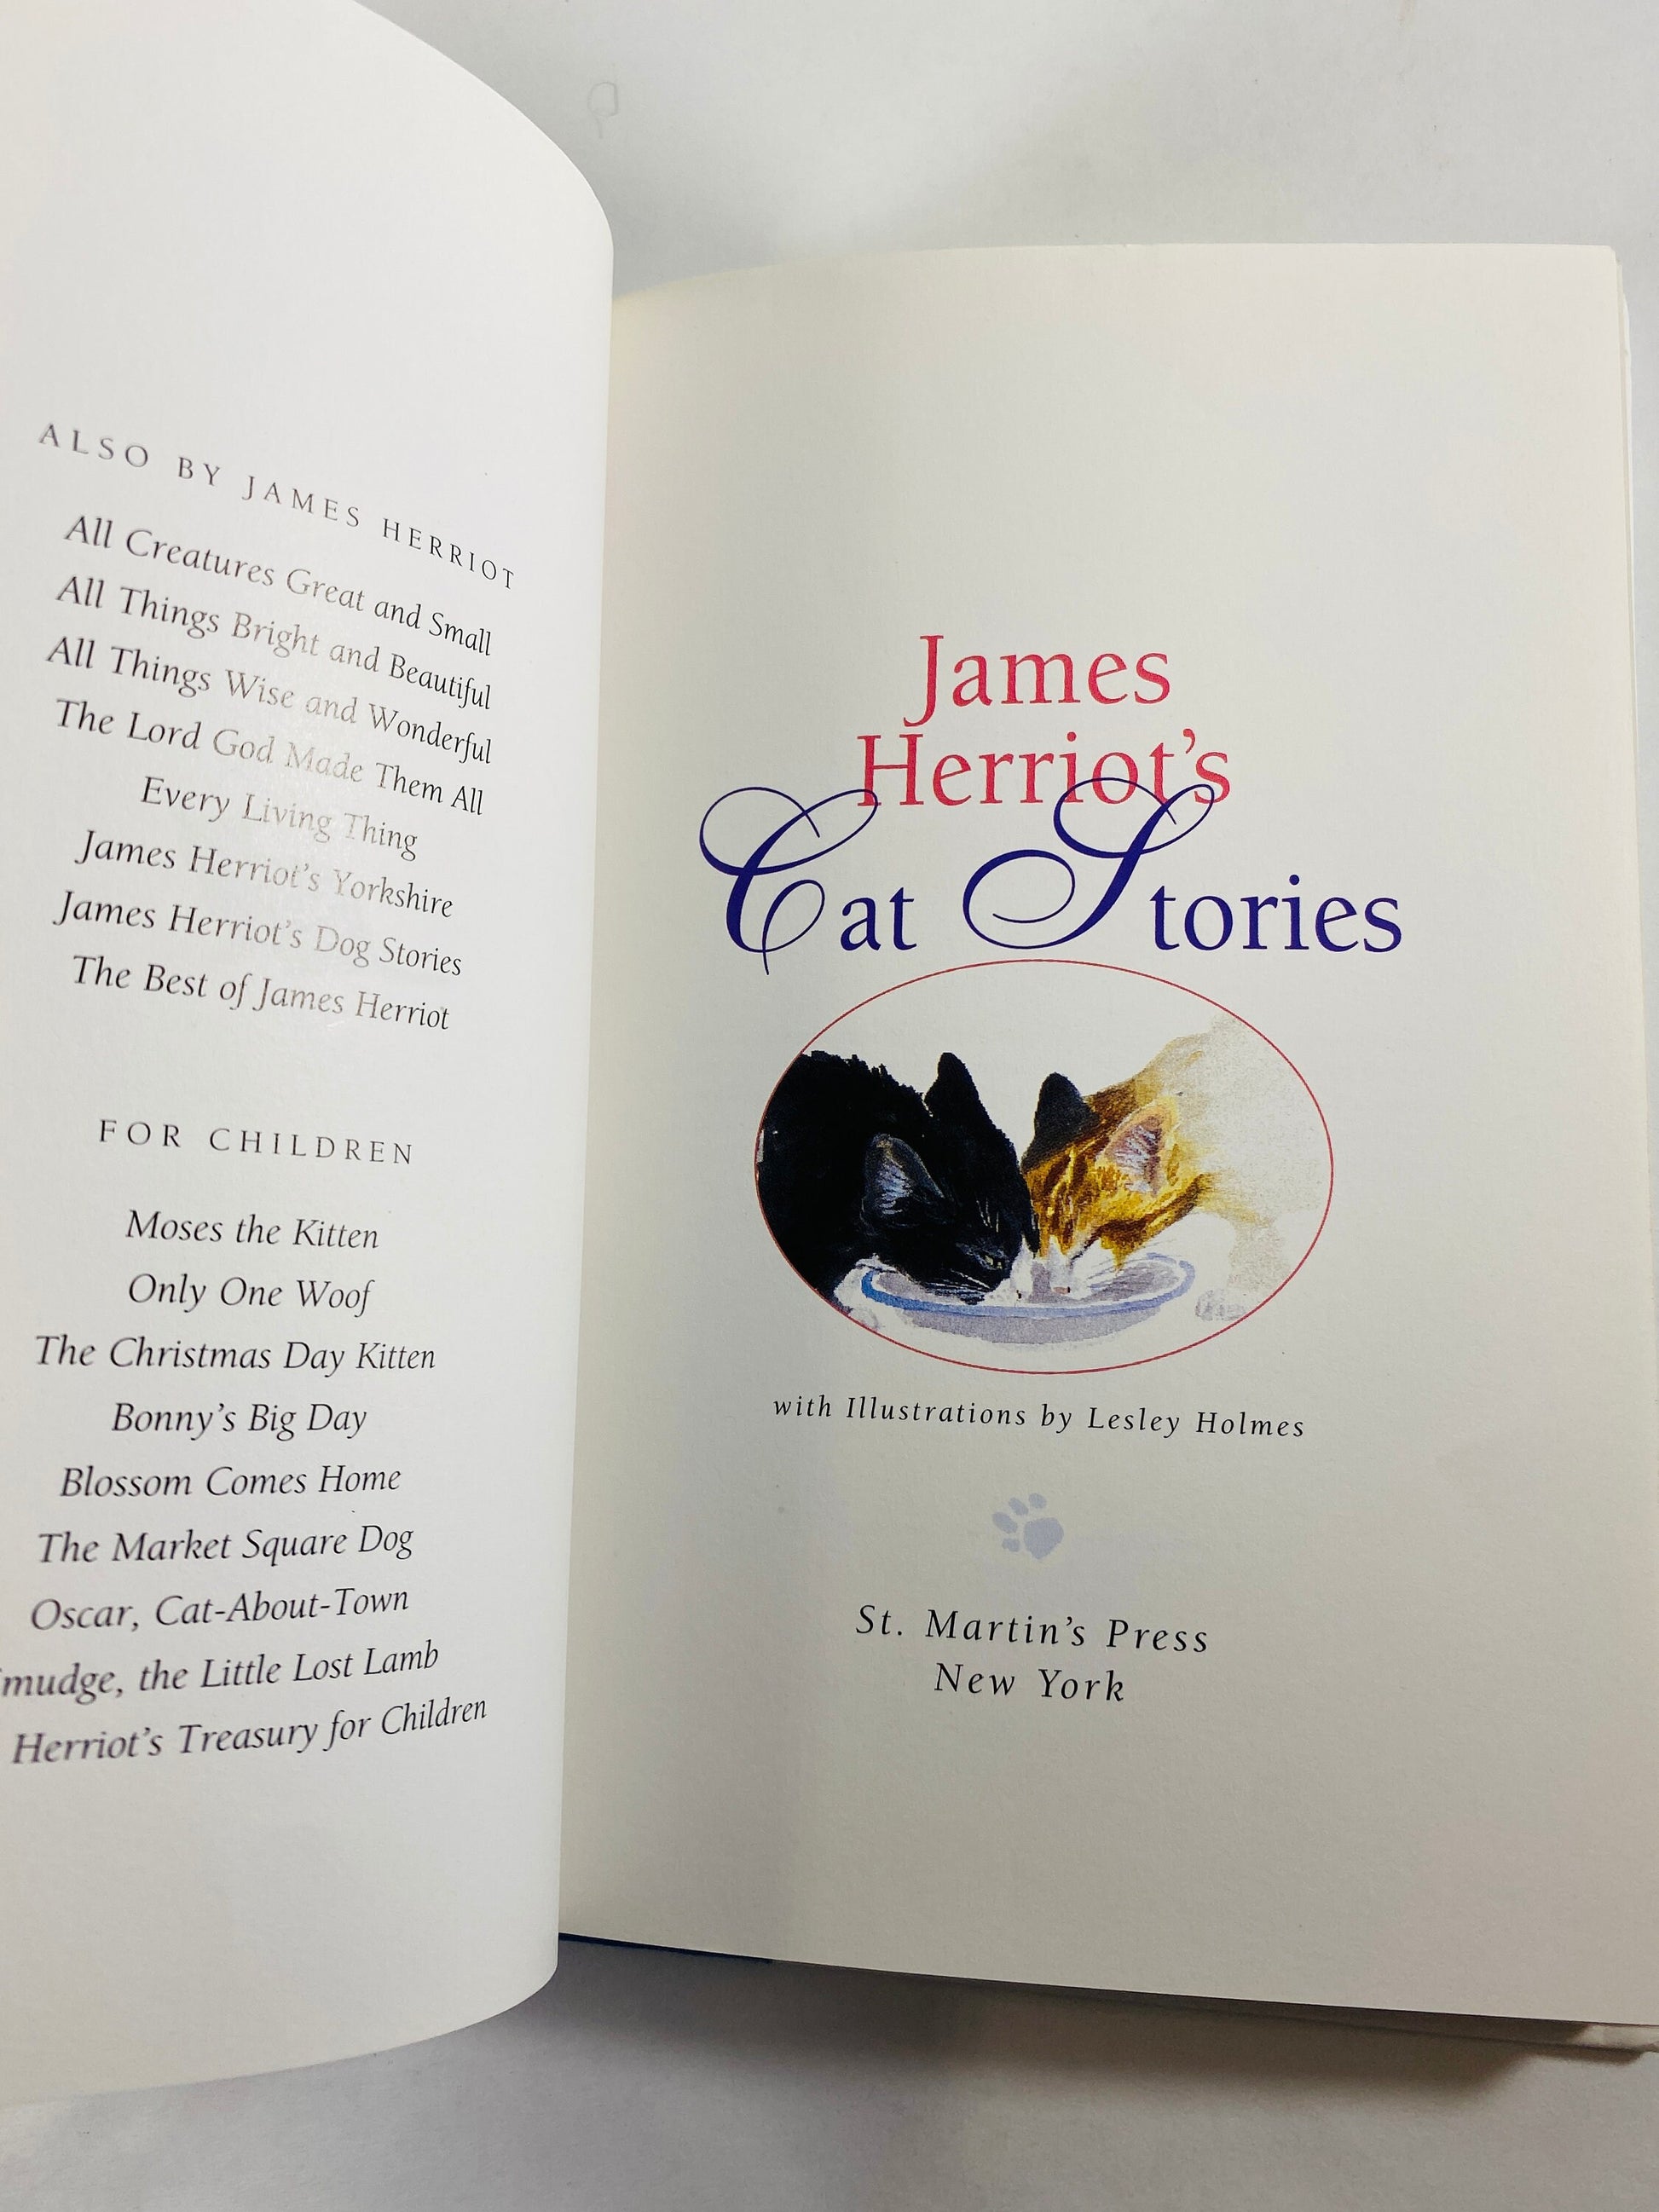 Cat Stories by James Herriot vintage FIRST EDITION book gift circa 1994 for feline fanatics! Veterinarian Heriot